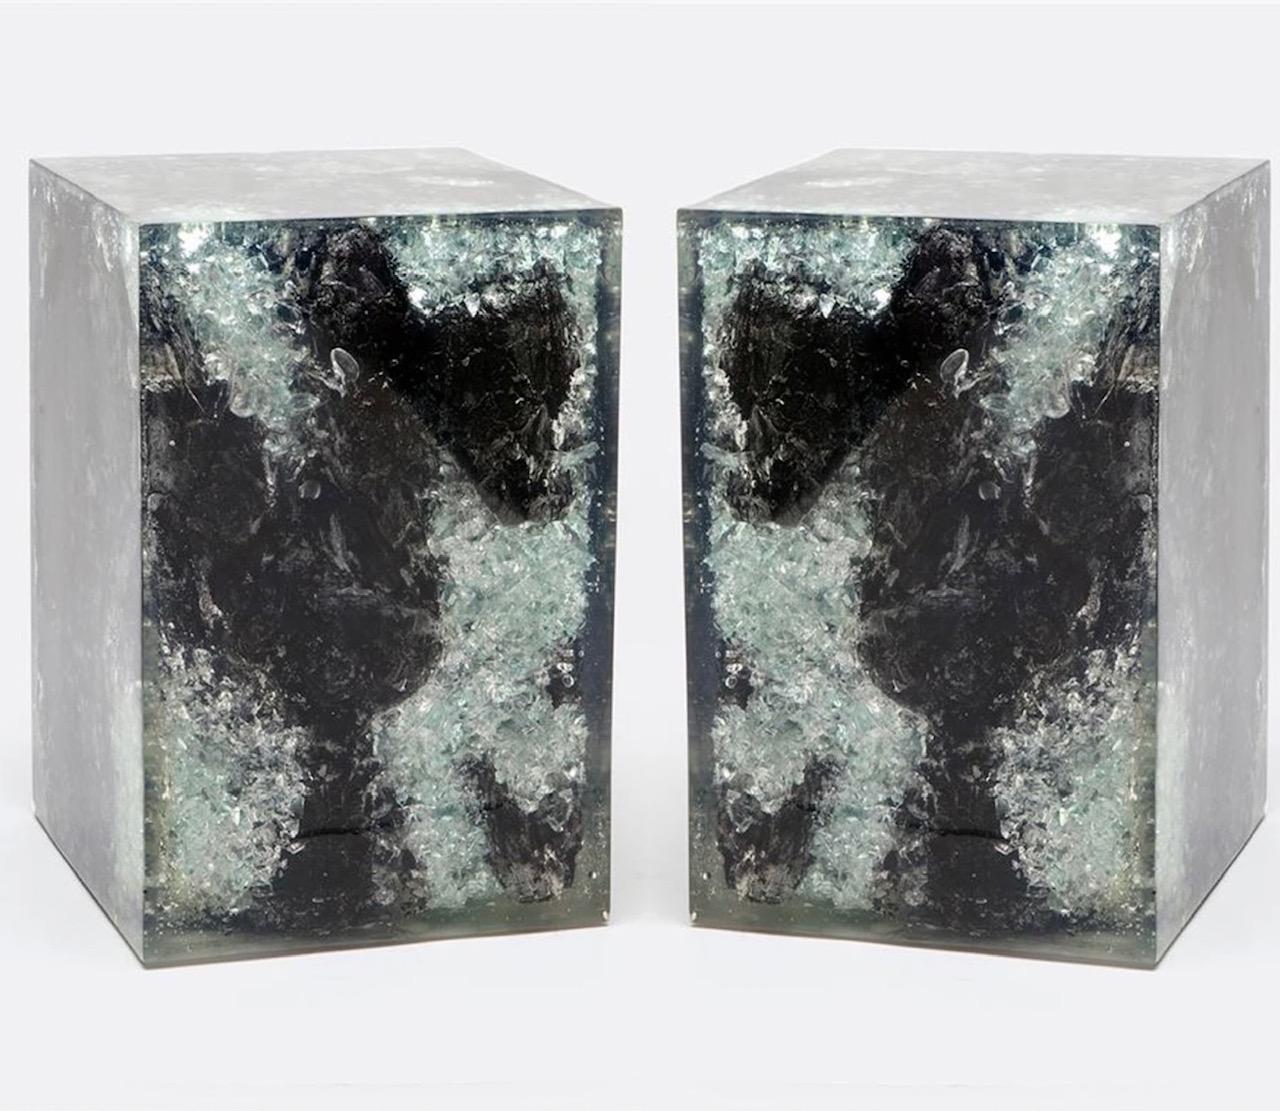 Pair of organic modern accent tables in burnt exotic teak, resin, and crystals. The tables have a polished finish with unique wood variations on all four sides. Handcrafted and multipurpose use as table or stool. Expect variation in colors as each